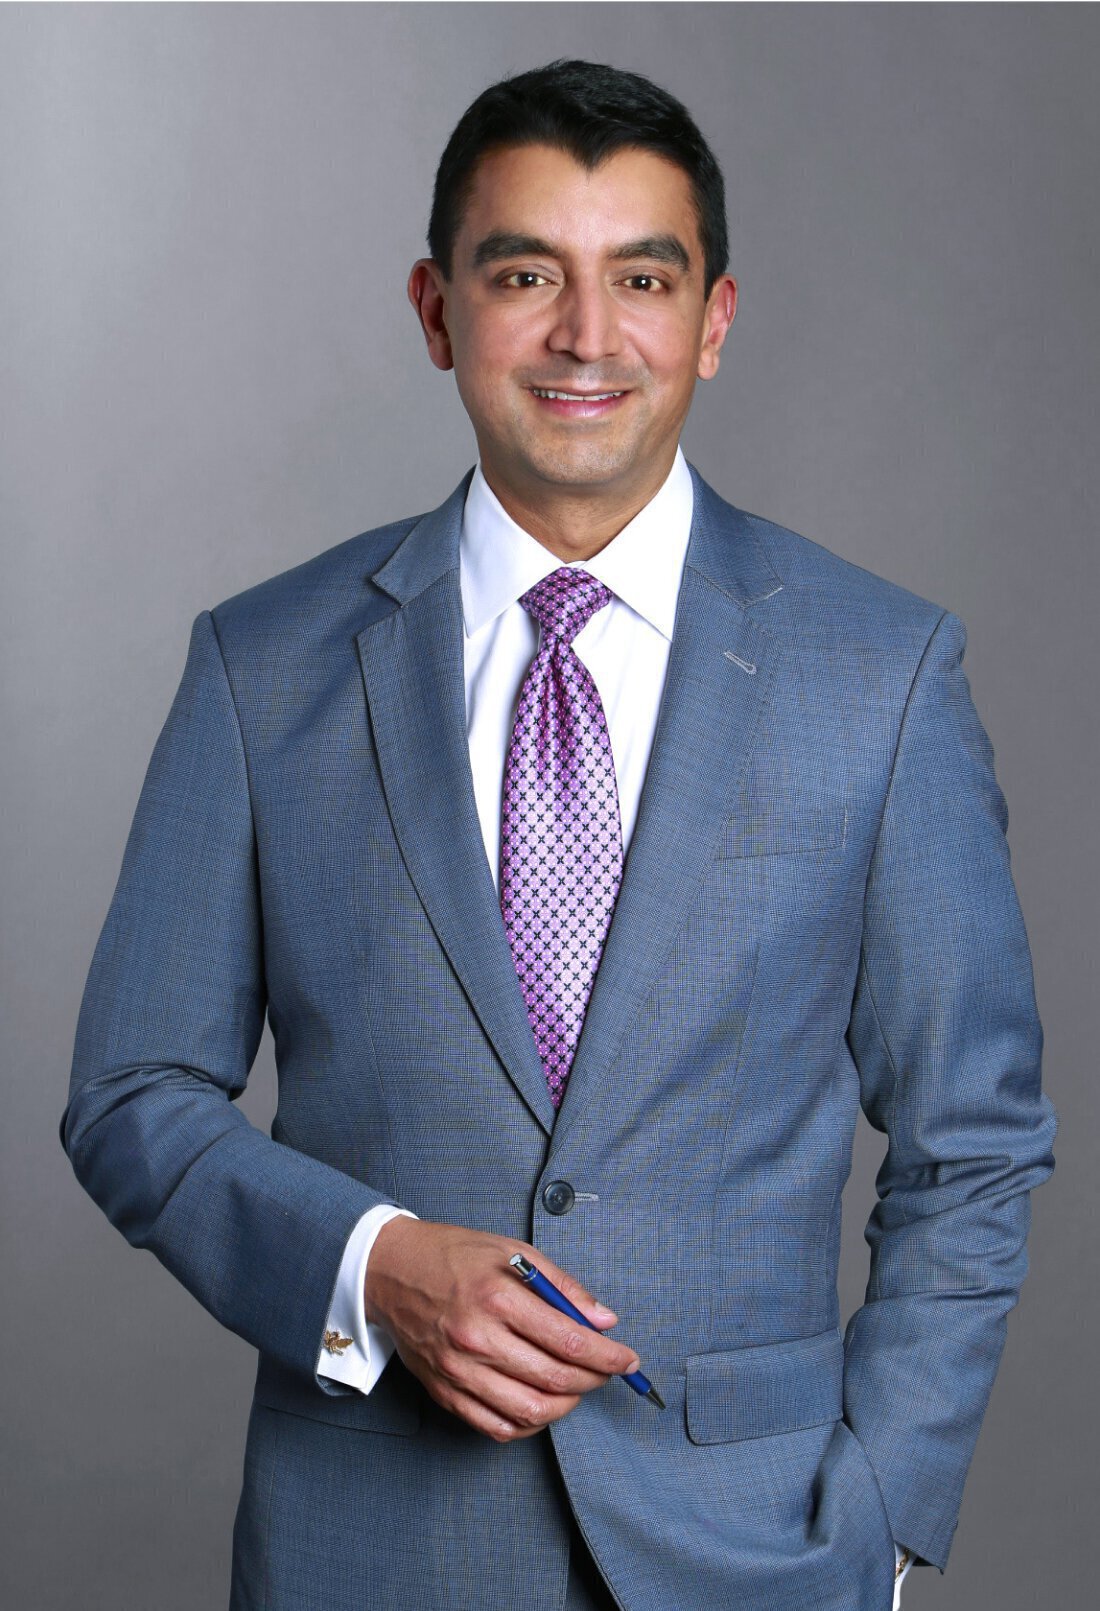 Dr. Nayak of St. Louis Plastic Surgery in a suit